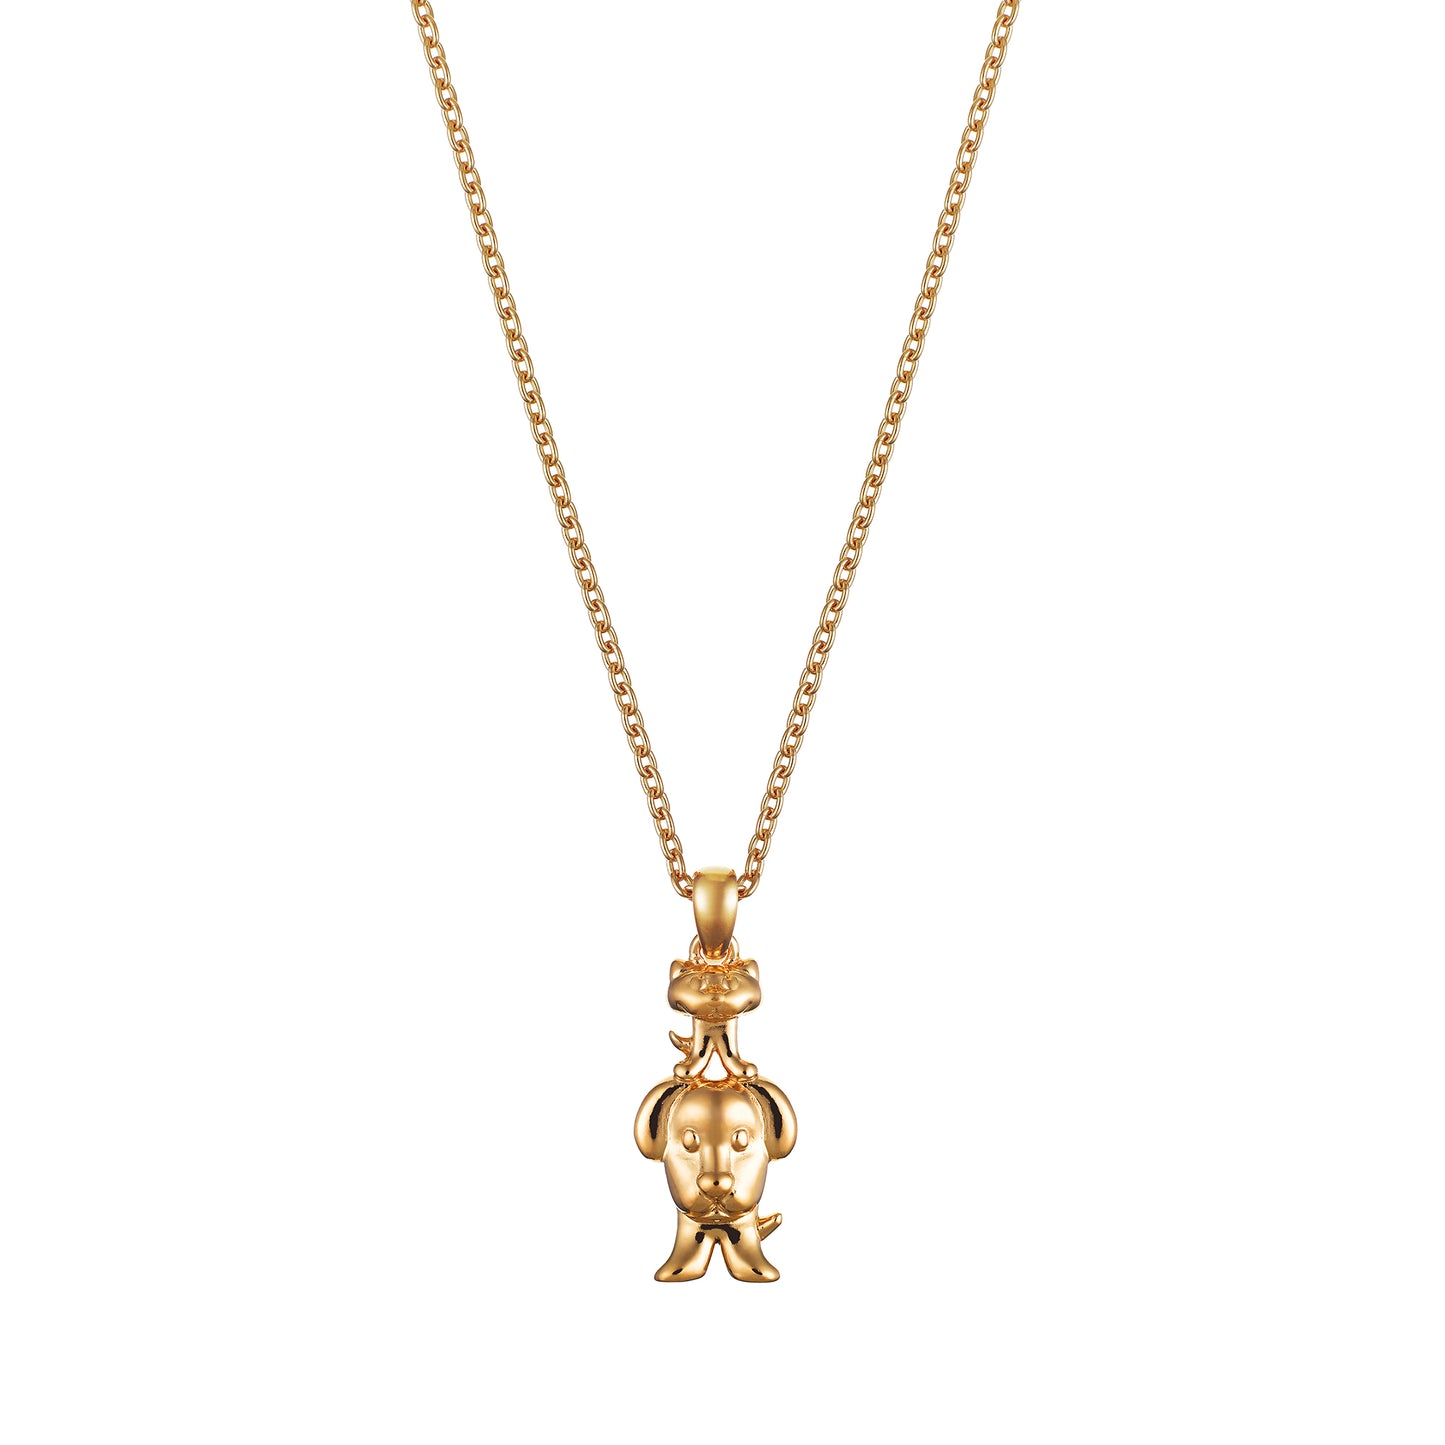 Children’s  Gold Cute Cat and Dog Pendant on an Extendable Chain Necklace